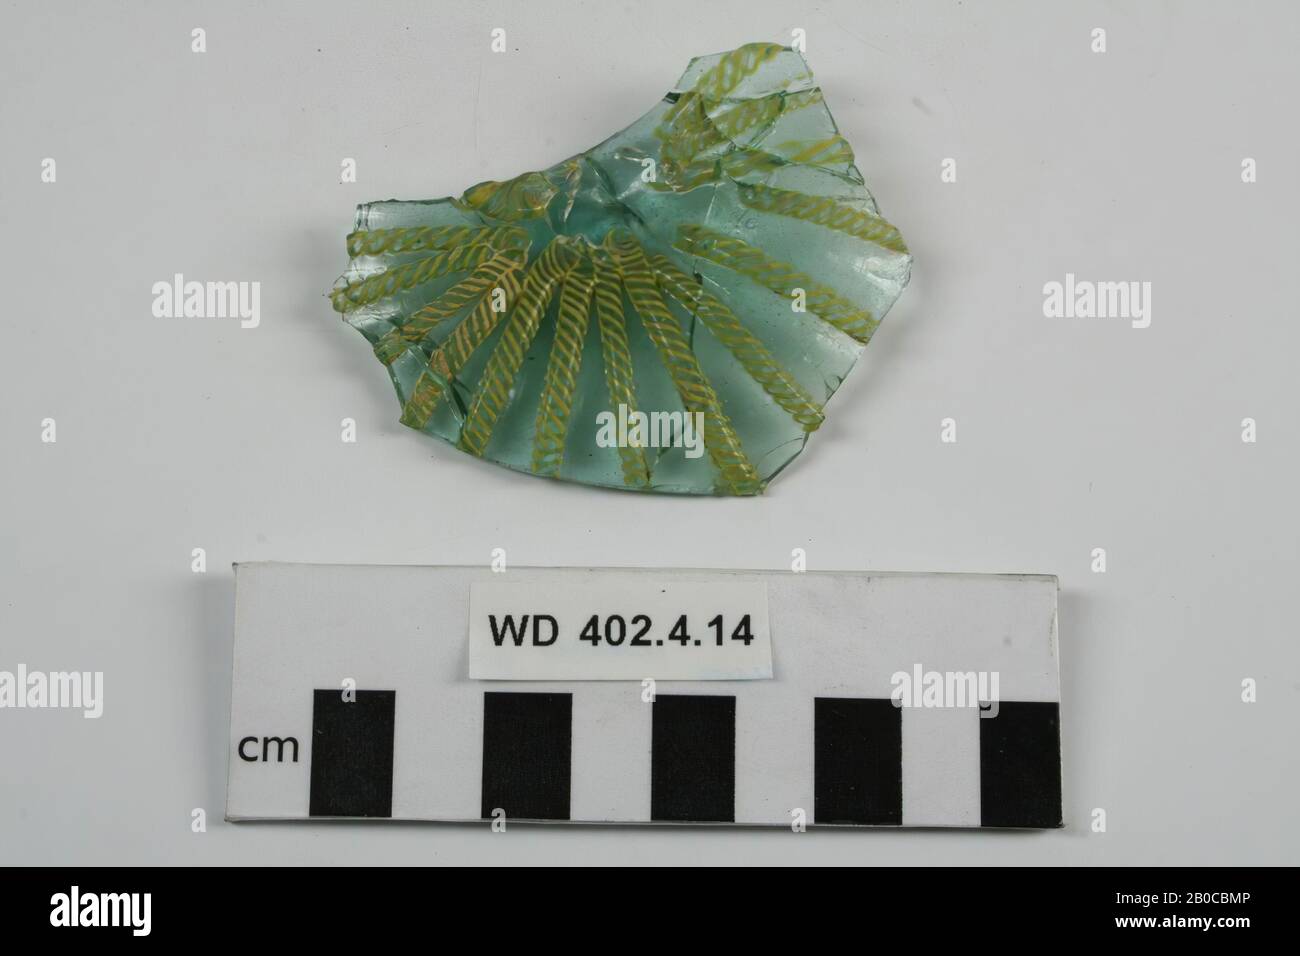 glass fragments, 11 fragments of the bottom of a dish with reticella decoration, glued together (1988 still consisting of only 4 fragments t.p.v 11, cf. Baumgartner Stock Photo